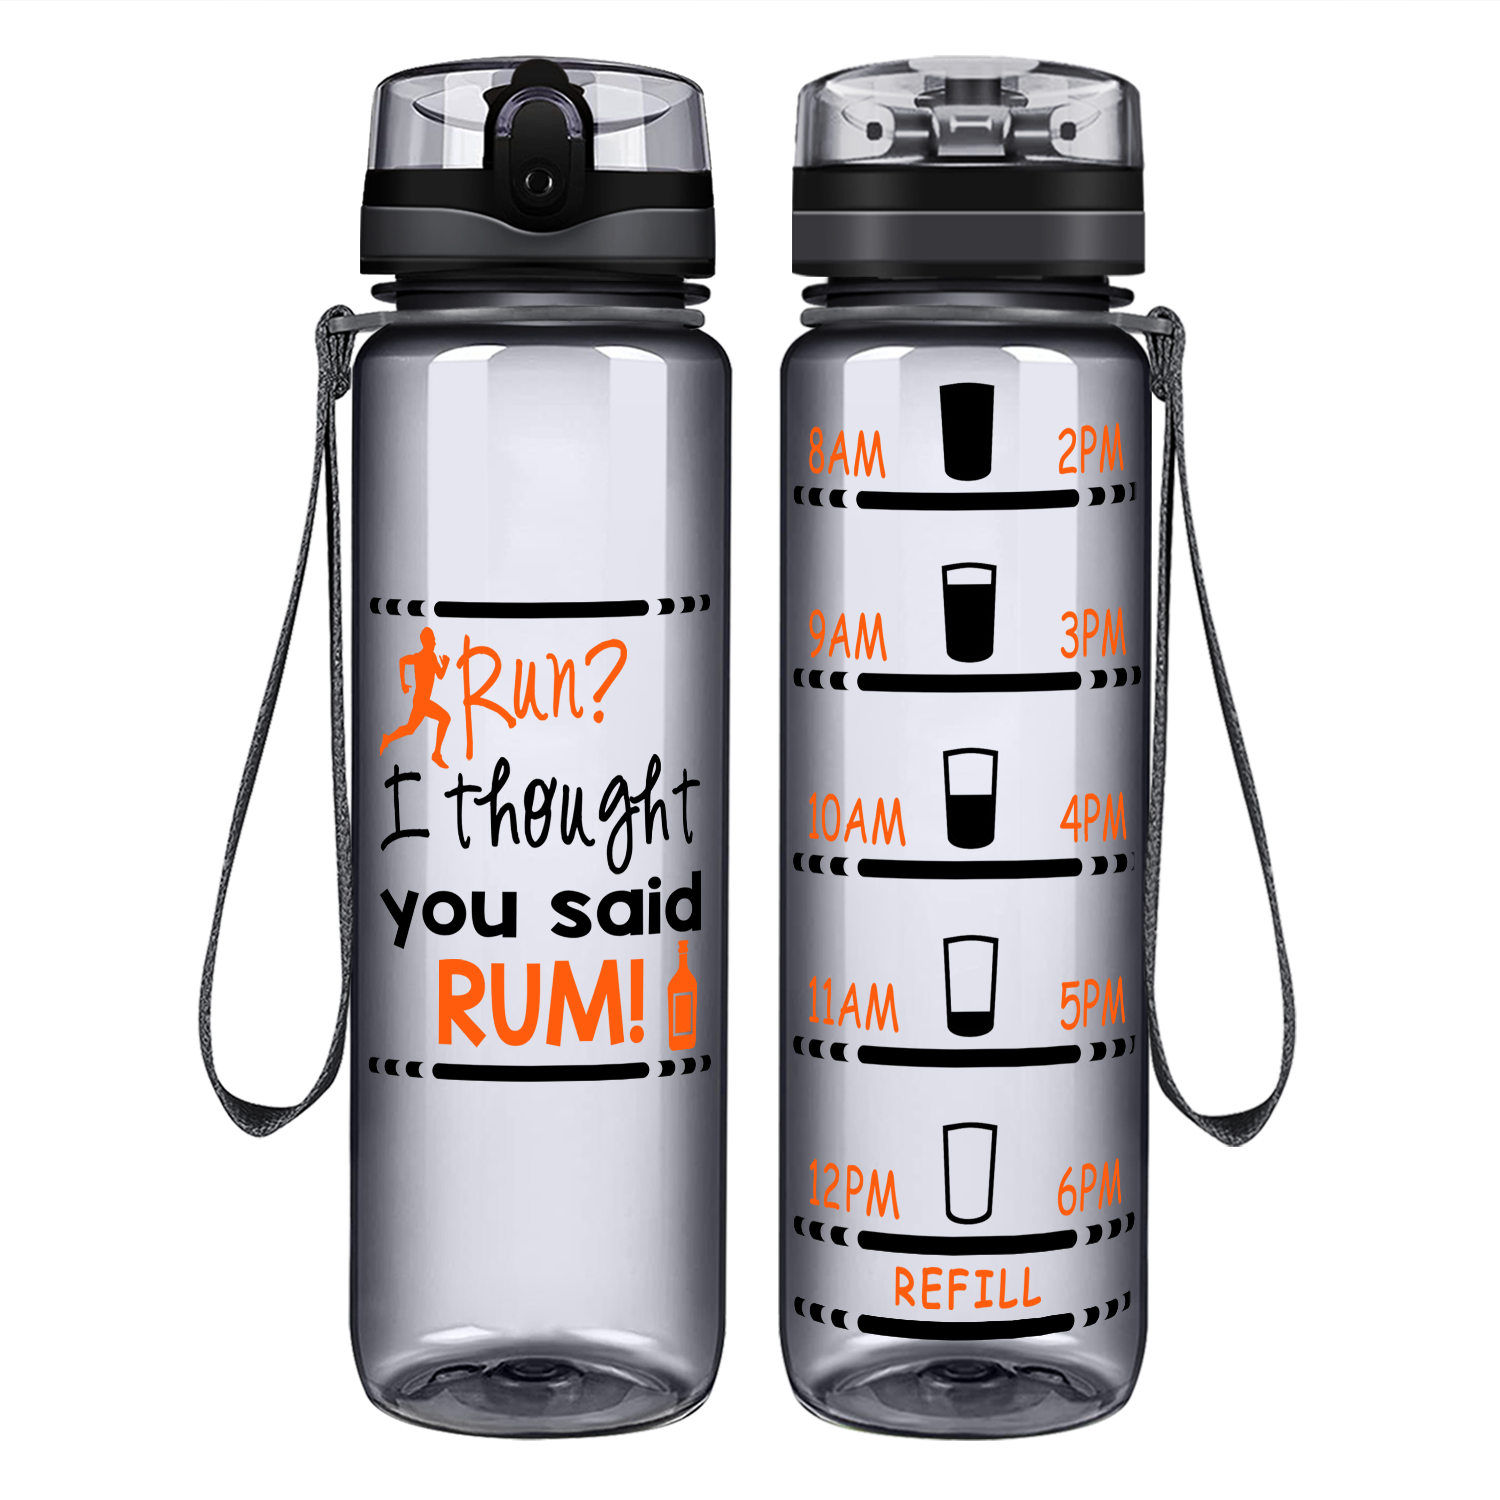 I Thought You Said RUM! on 32 oz Motivational Tracking Water Bottle